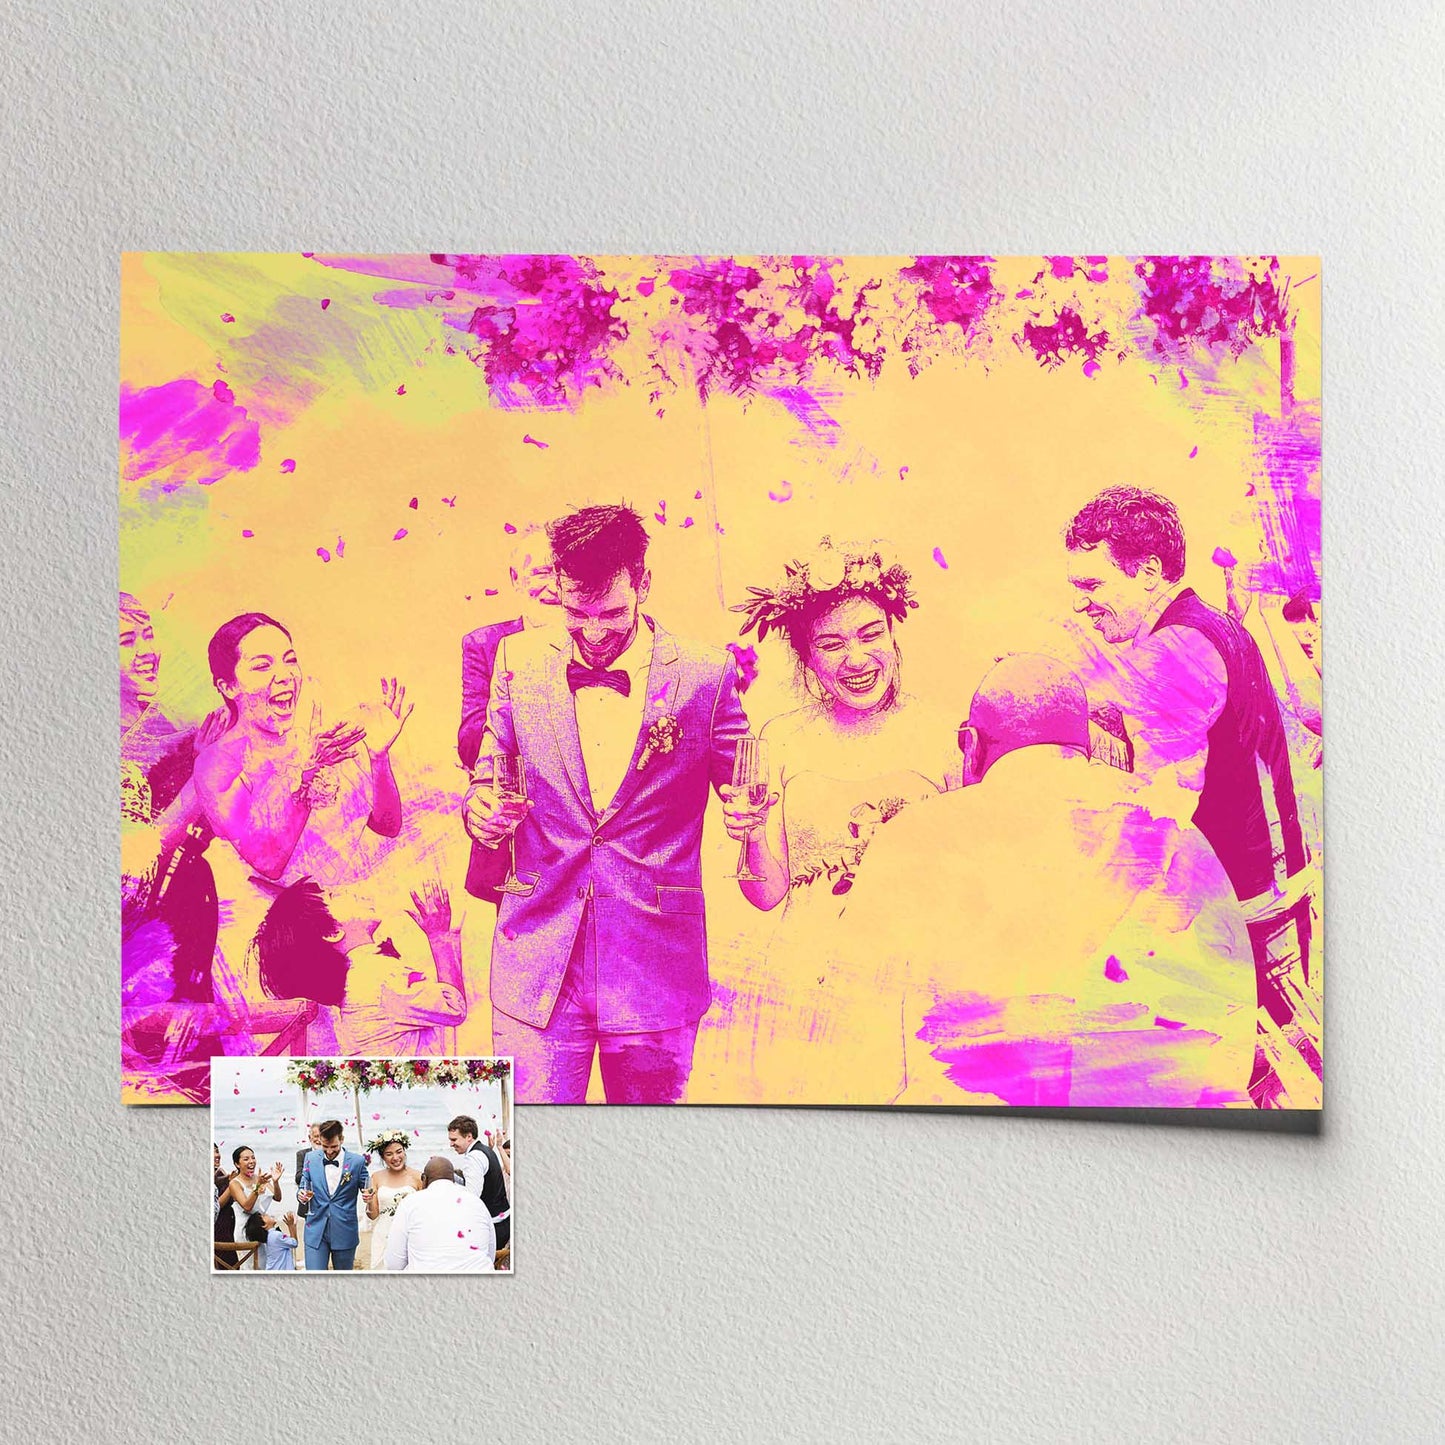 Celebrate life's special moments with our Personalised Pink & Yellow Watercolor Print. Created from your photo in a realistic traditional watercolor style, this artwork radiates a sense of joy and positivity